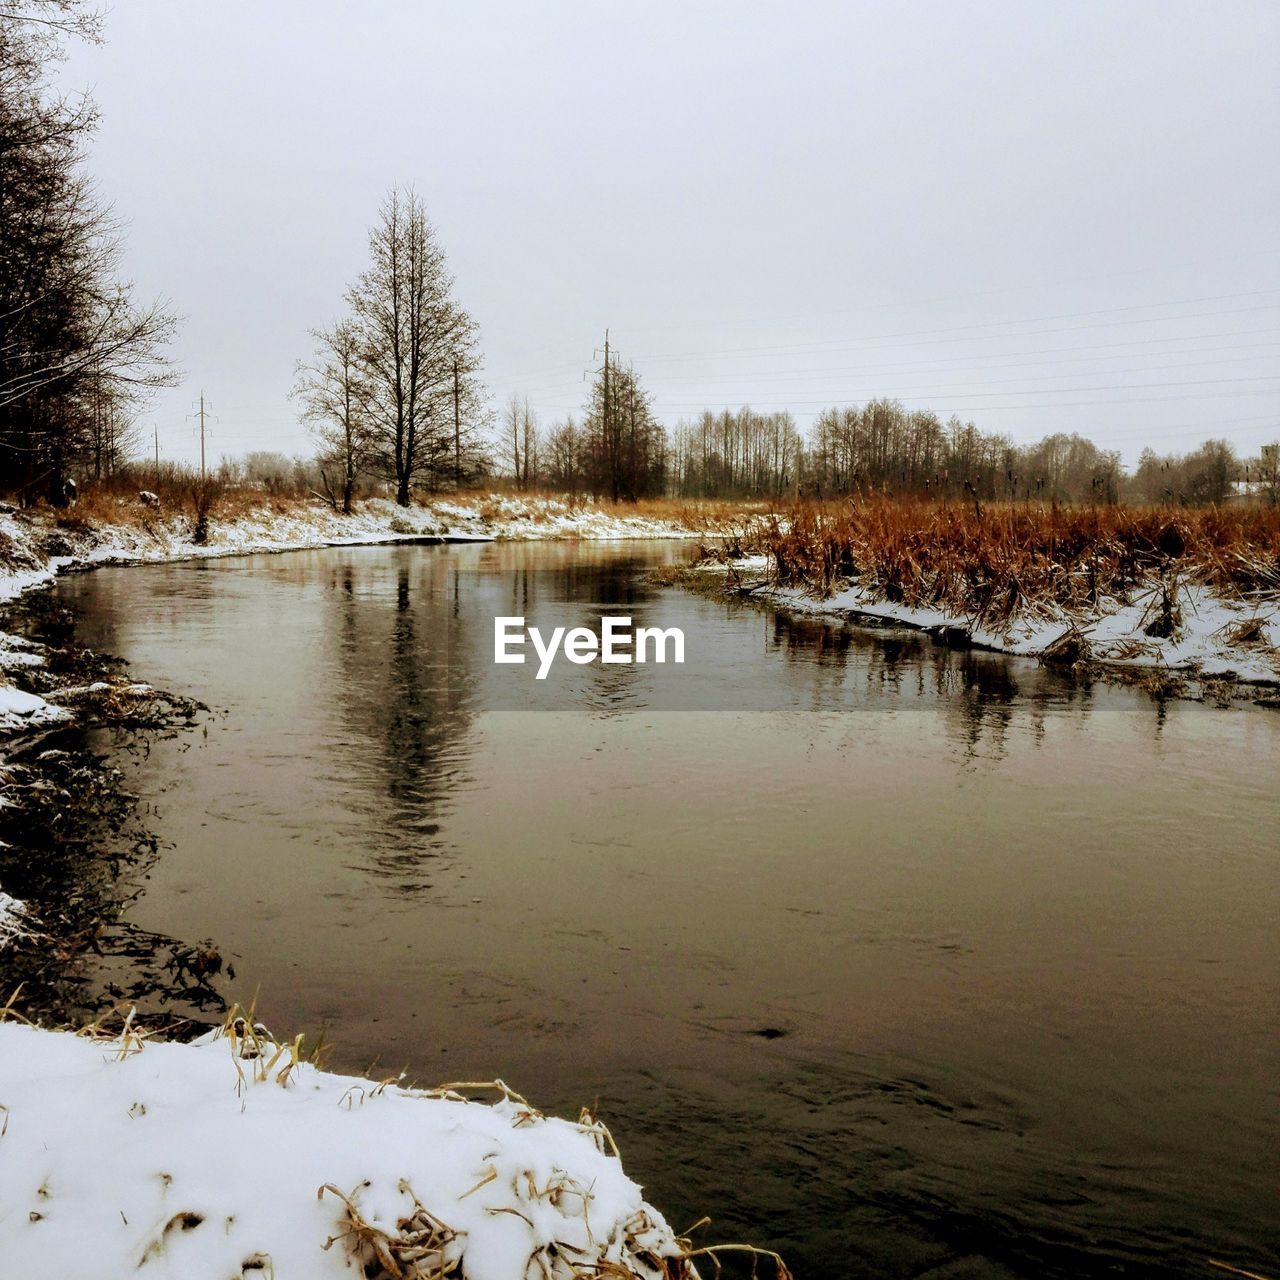 SCENIC VIEW OF LAKE IN WINTER